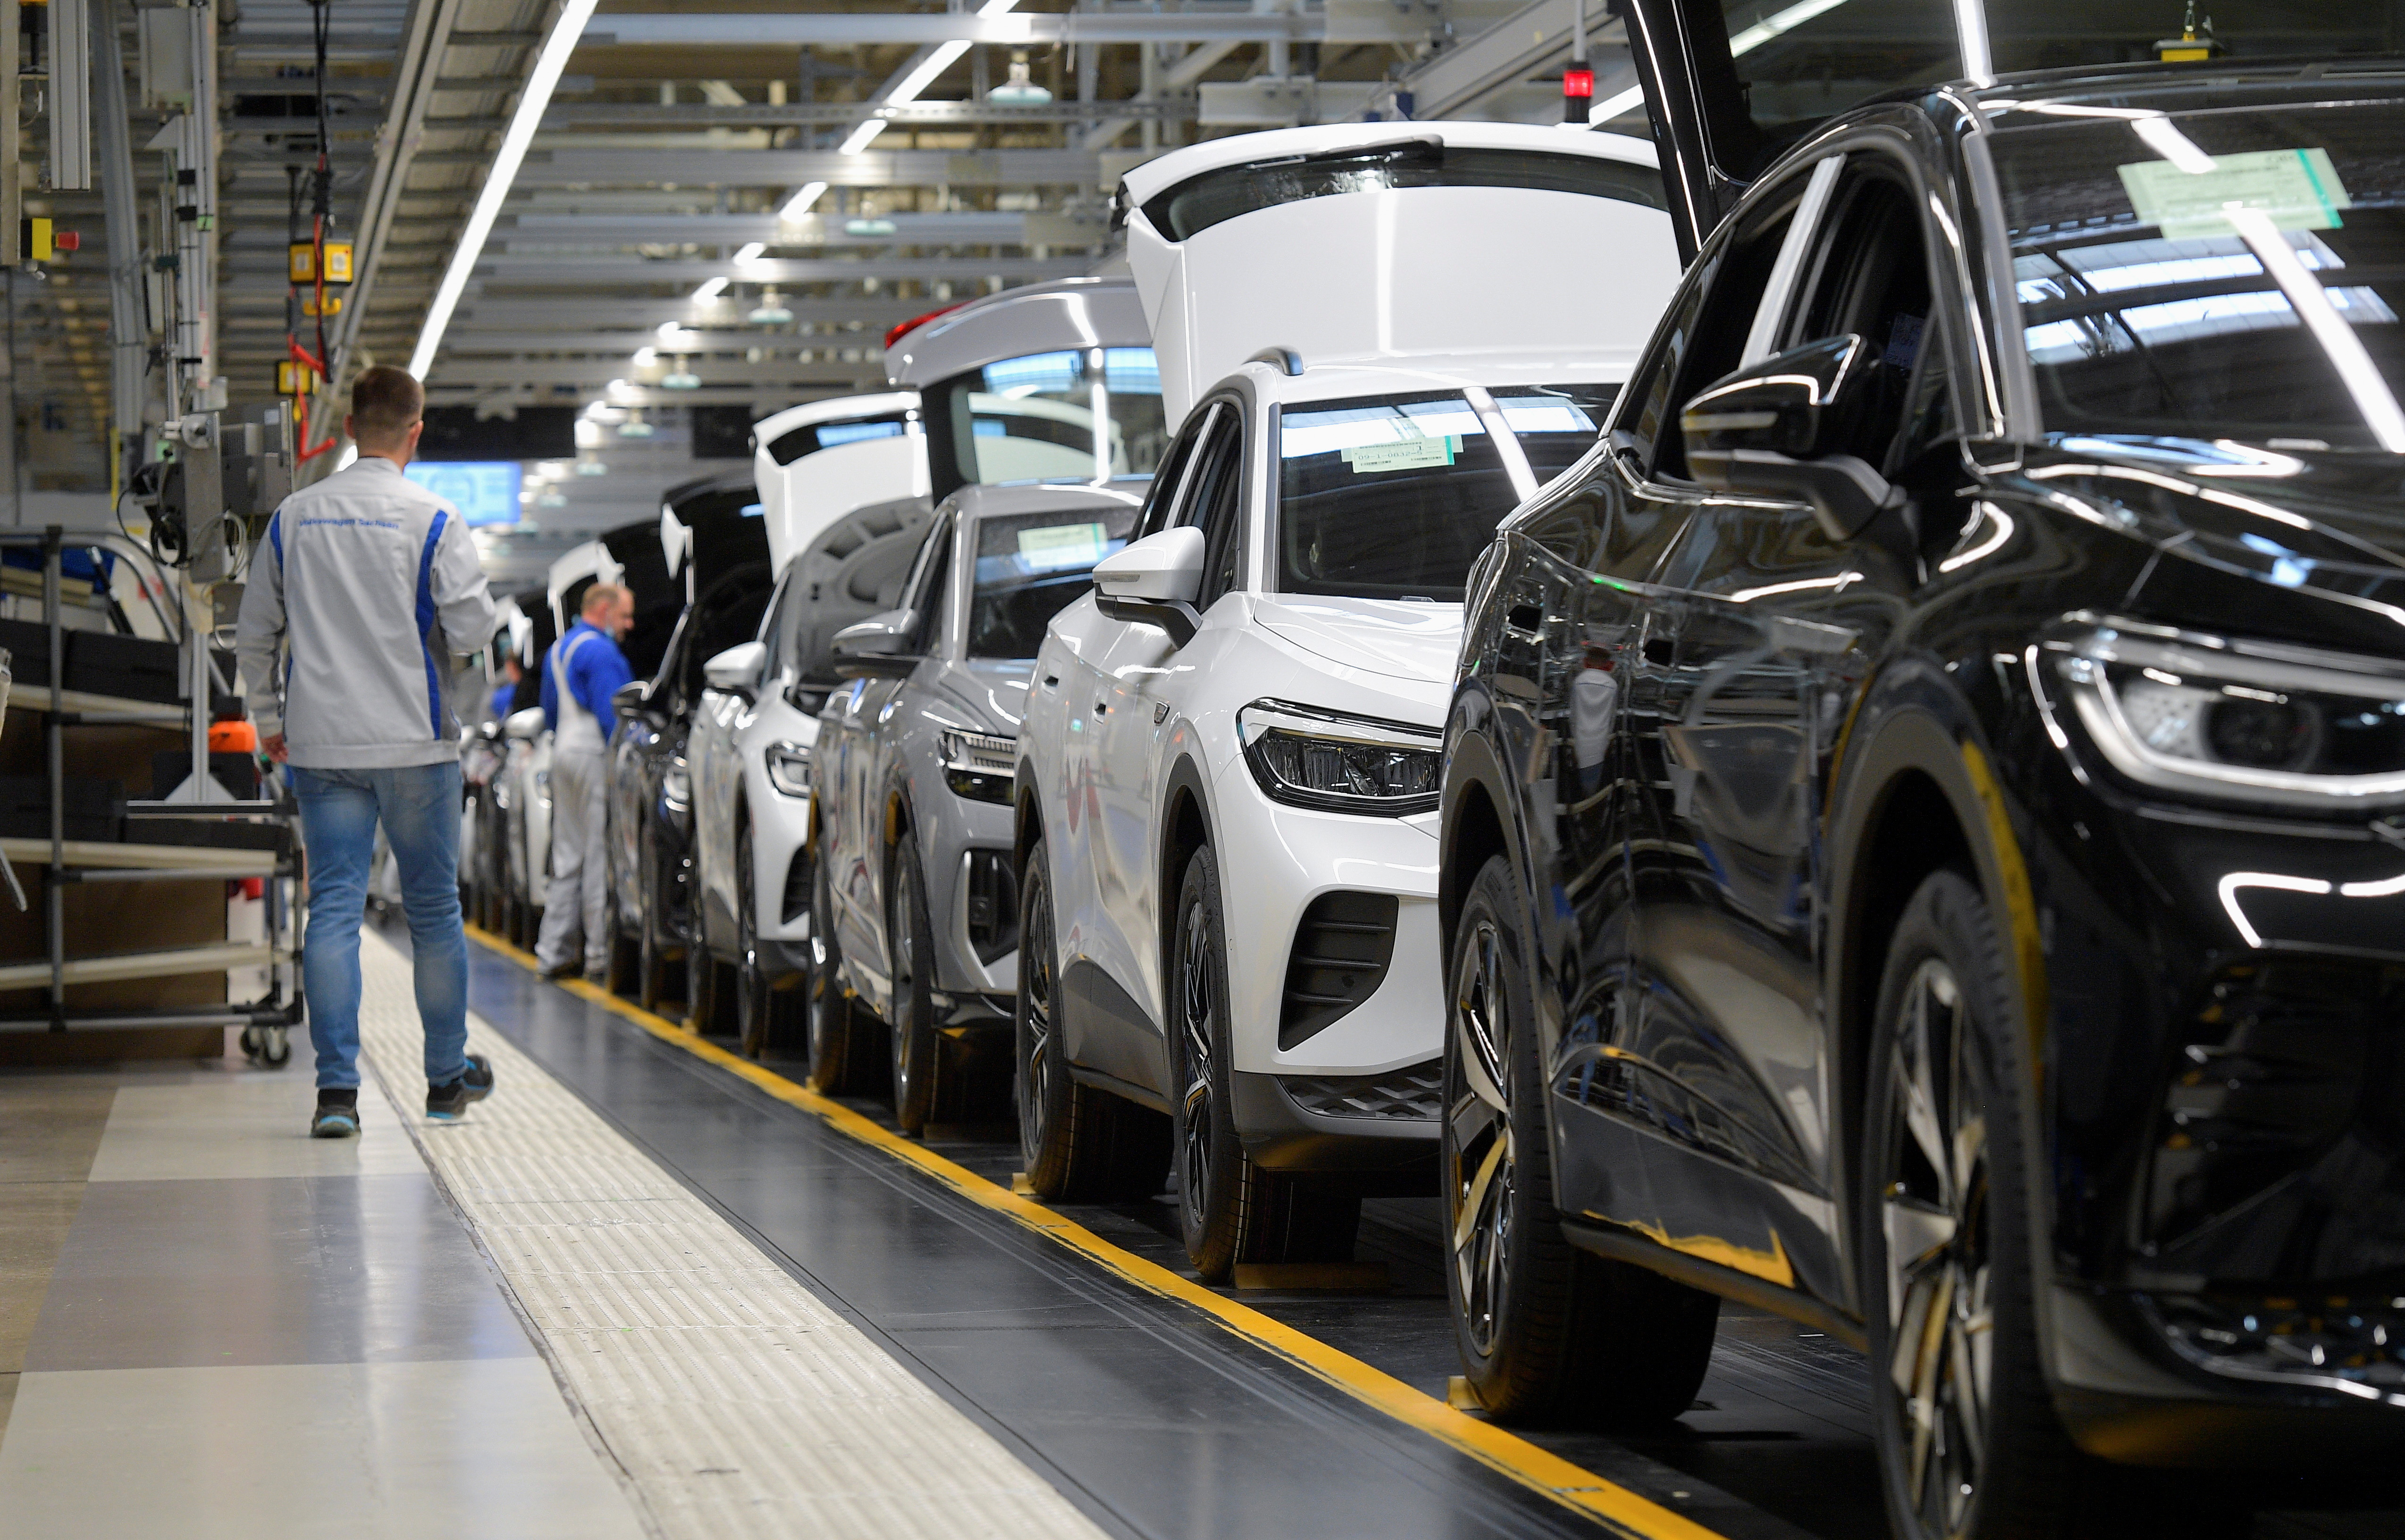 Technicians work at the production line for electric car models of the Volkswagen Group in Zwickau